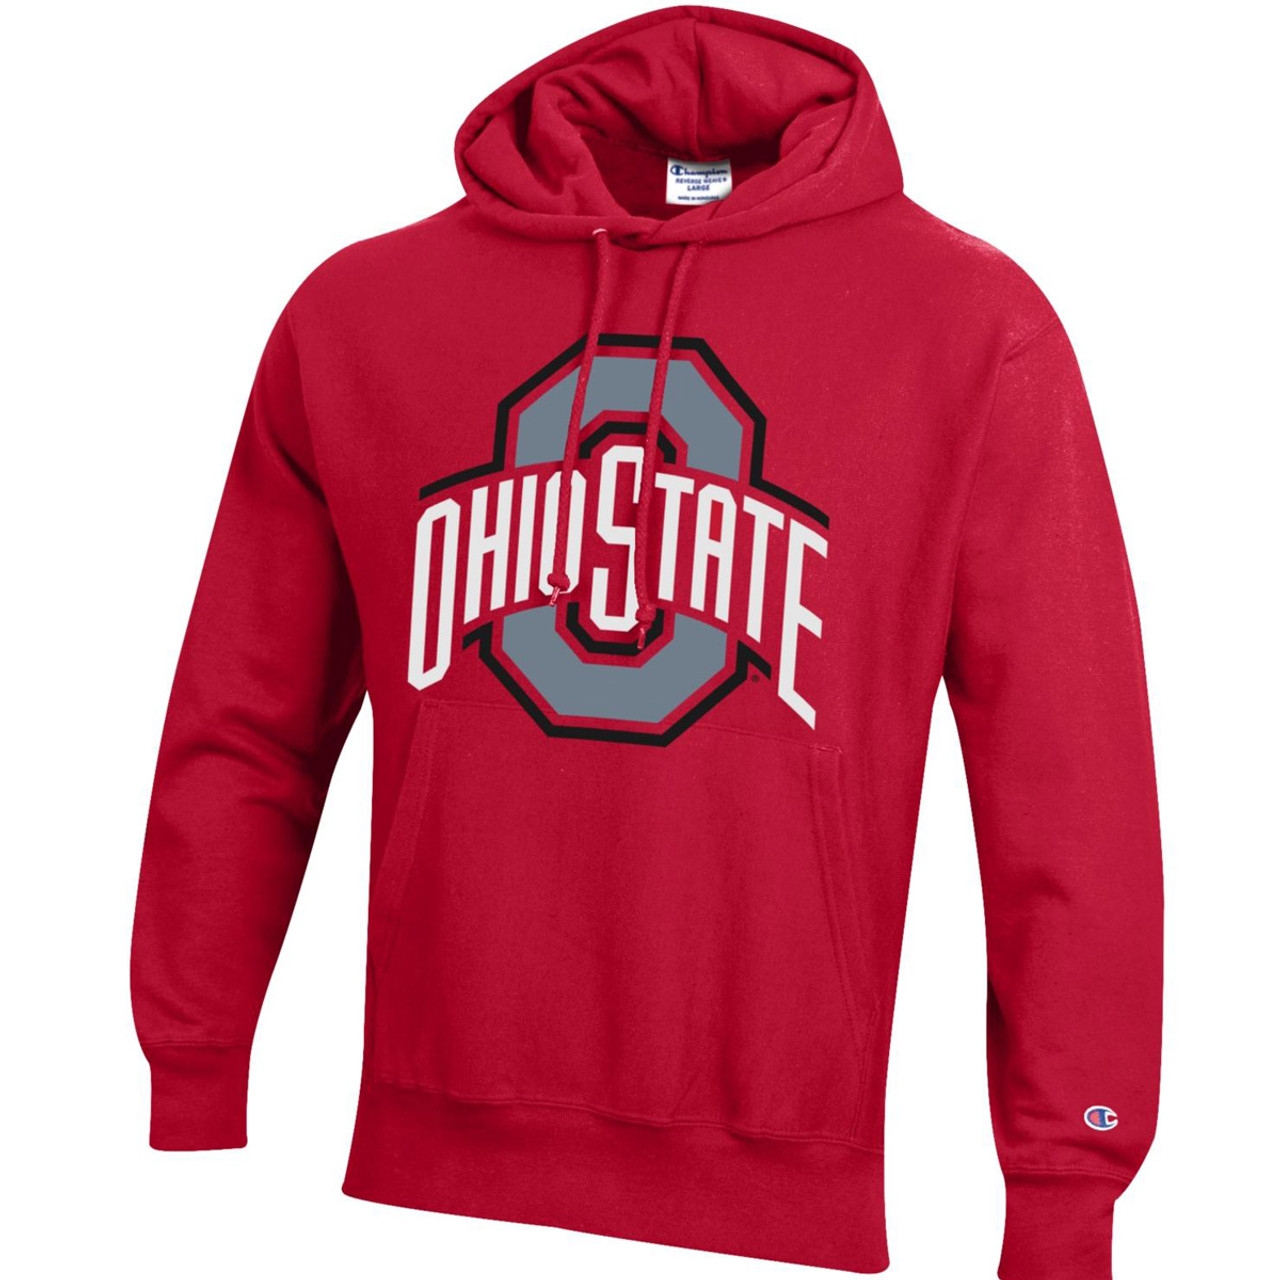 Reverse Weave Hoodie - Red with gray and White Ohio State Logo - College  Traditions